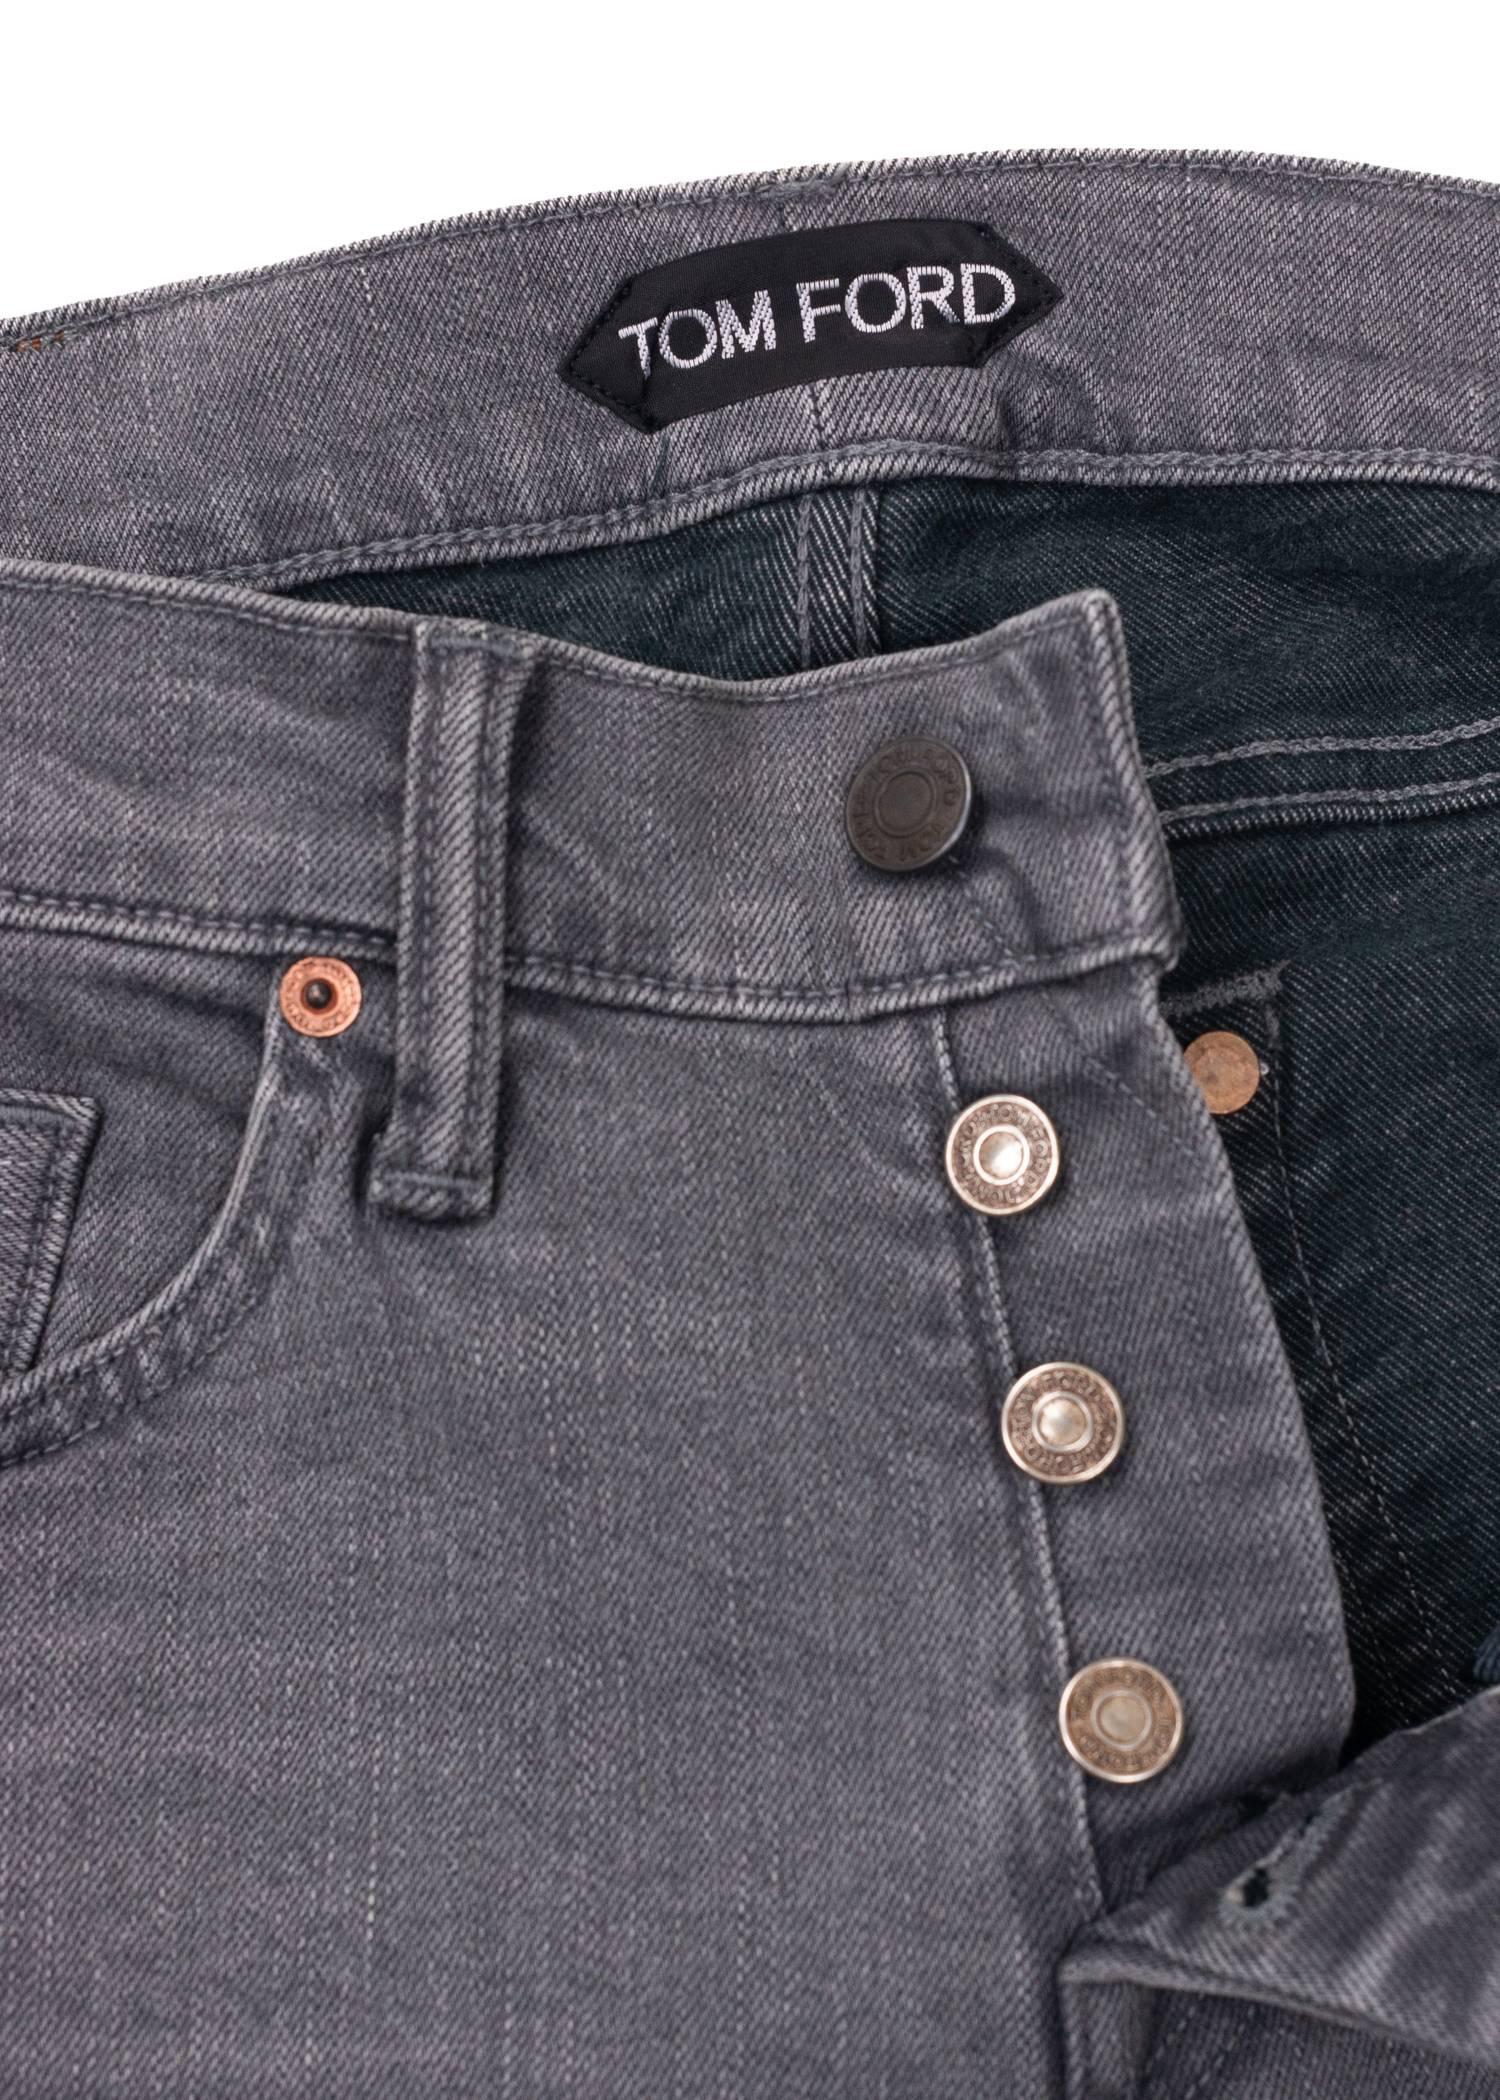 tom ford jeans